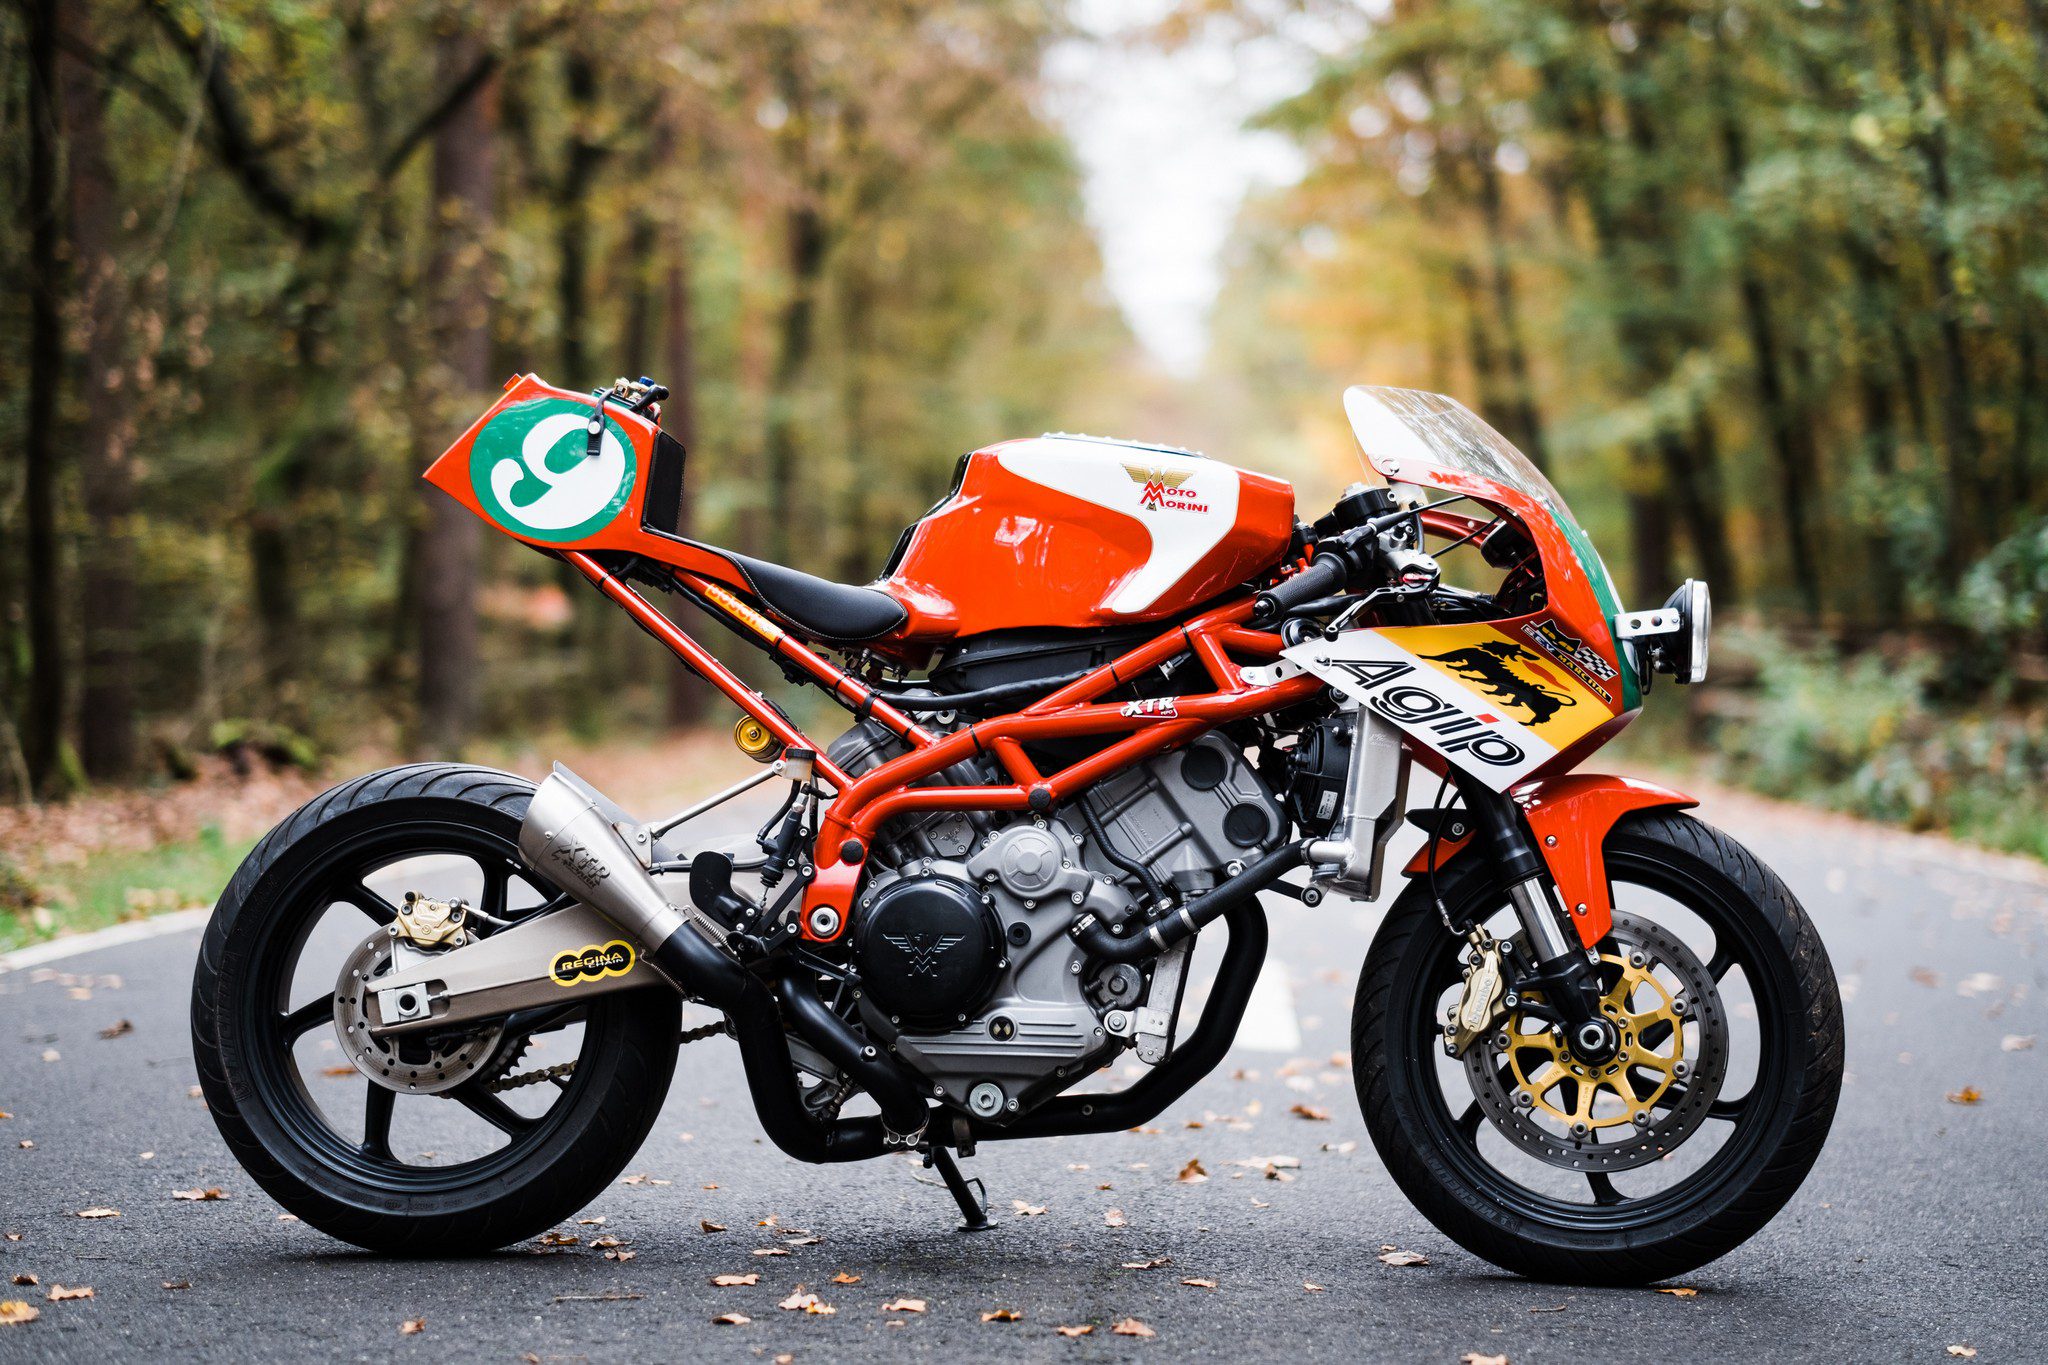 Ducati Road Racer motorcycle on a leafy forest road in Europe